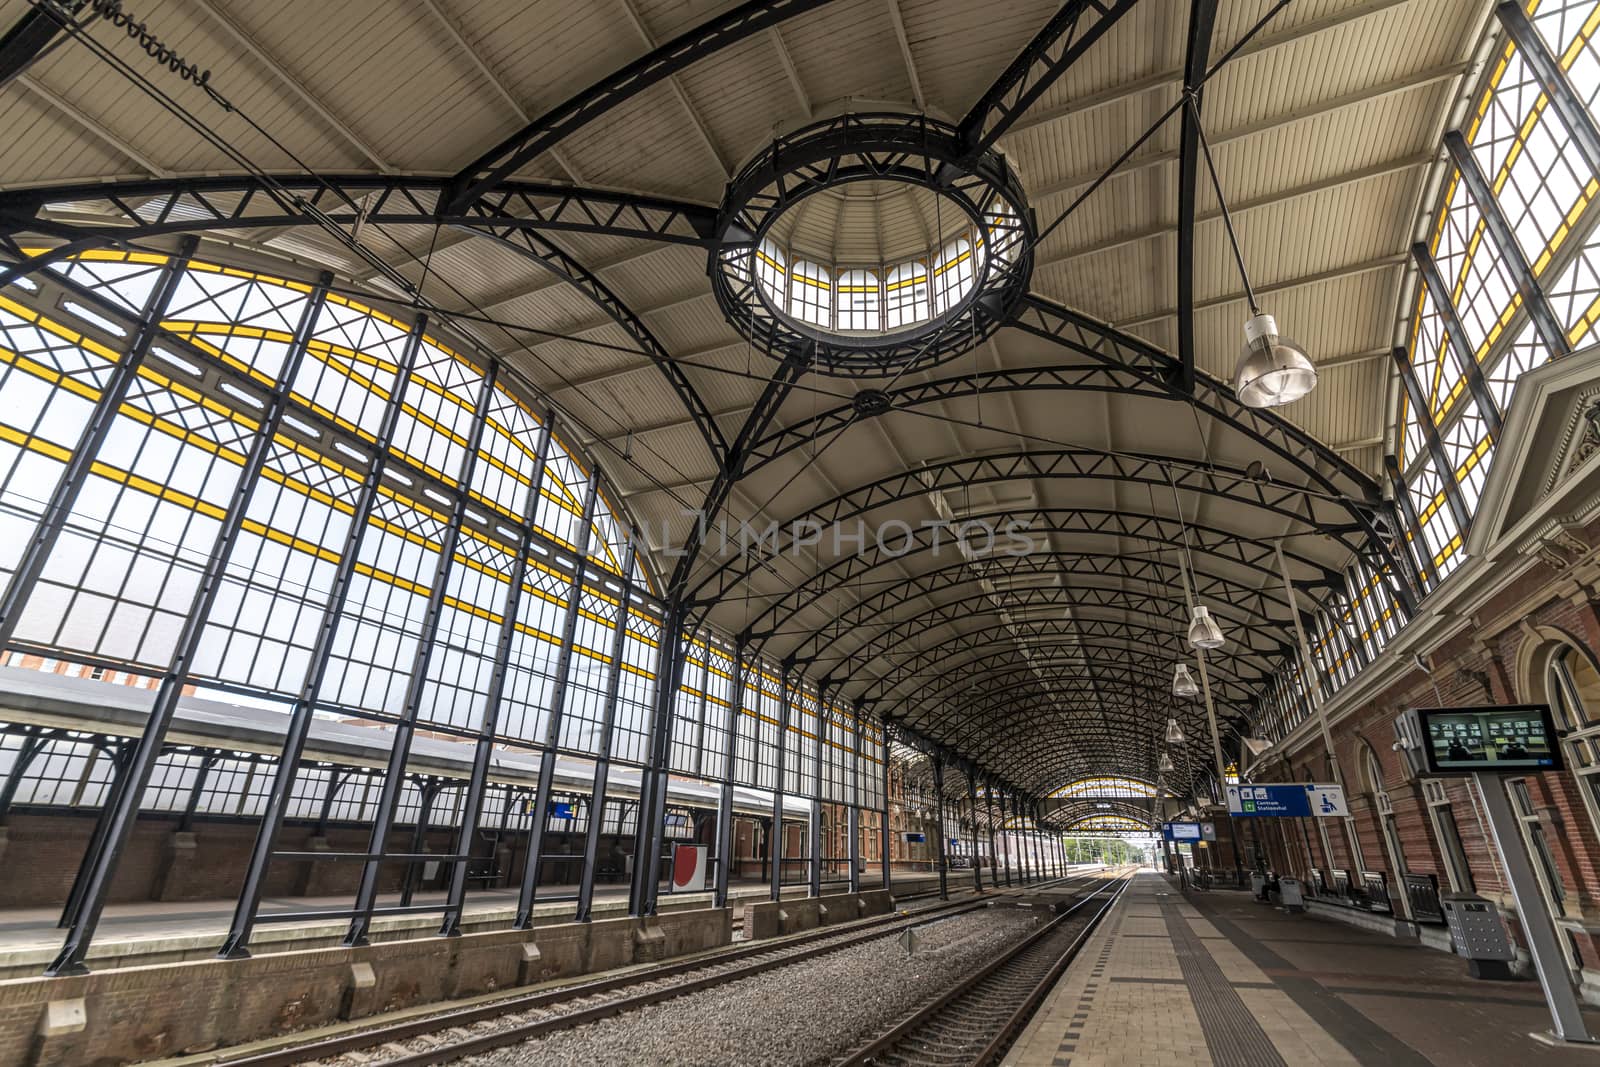 THE HAGUE, 10 June 2019 - view of the 'Art Deco' architecture style of the Den Haag HS train station platform with no traveler by ankorlight